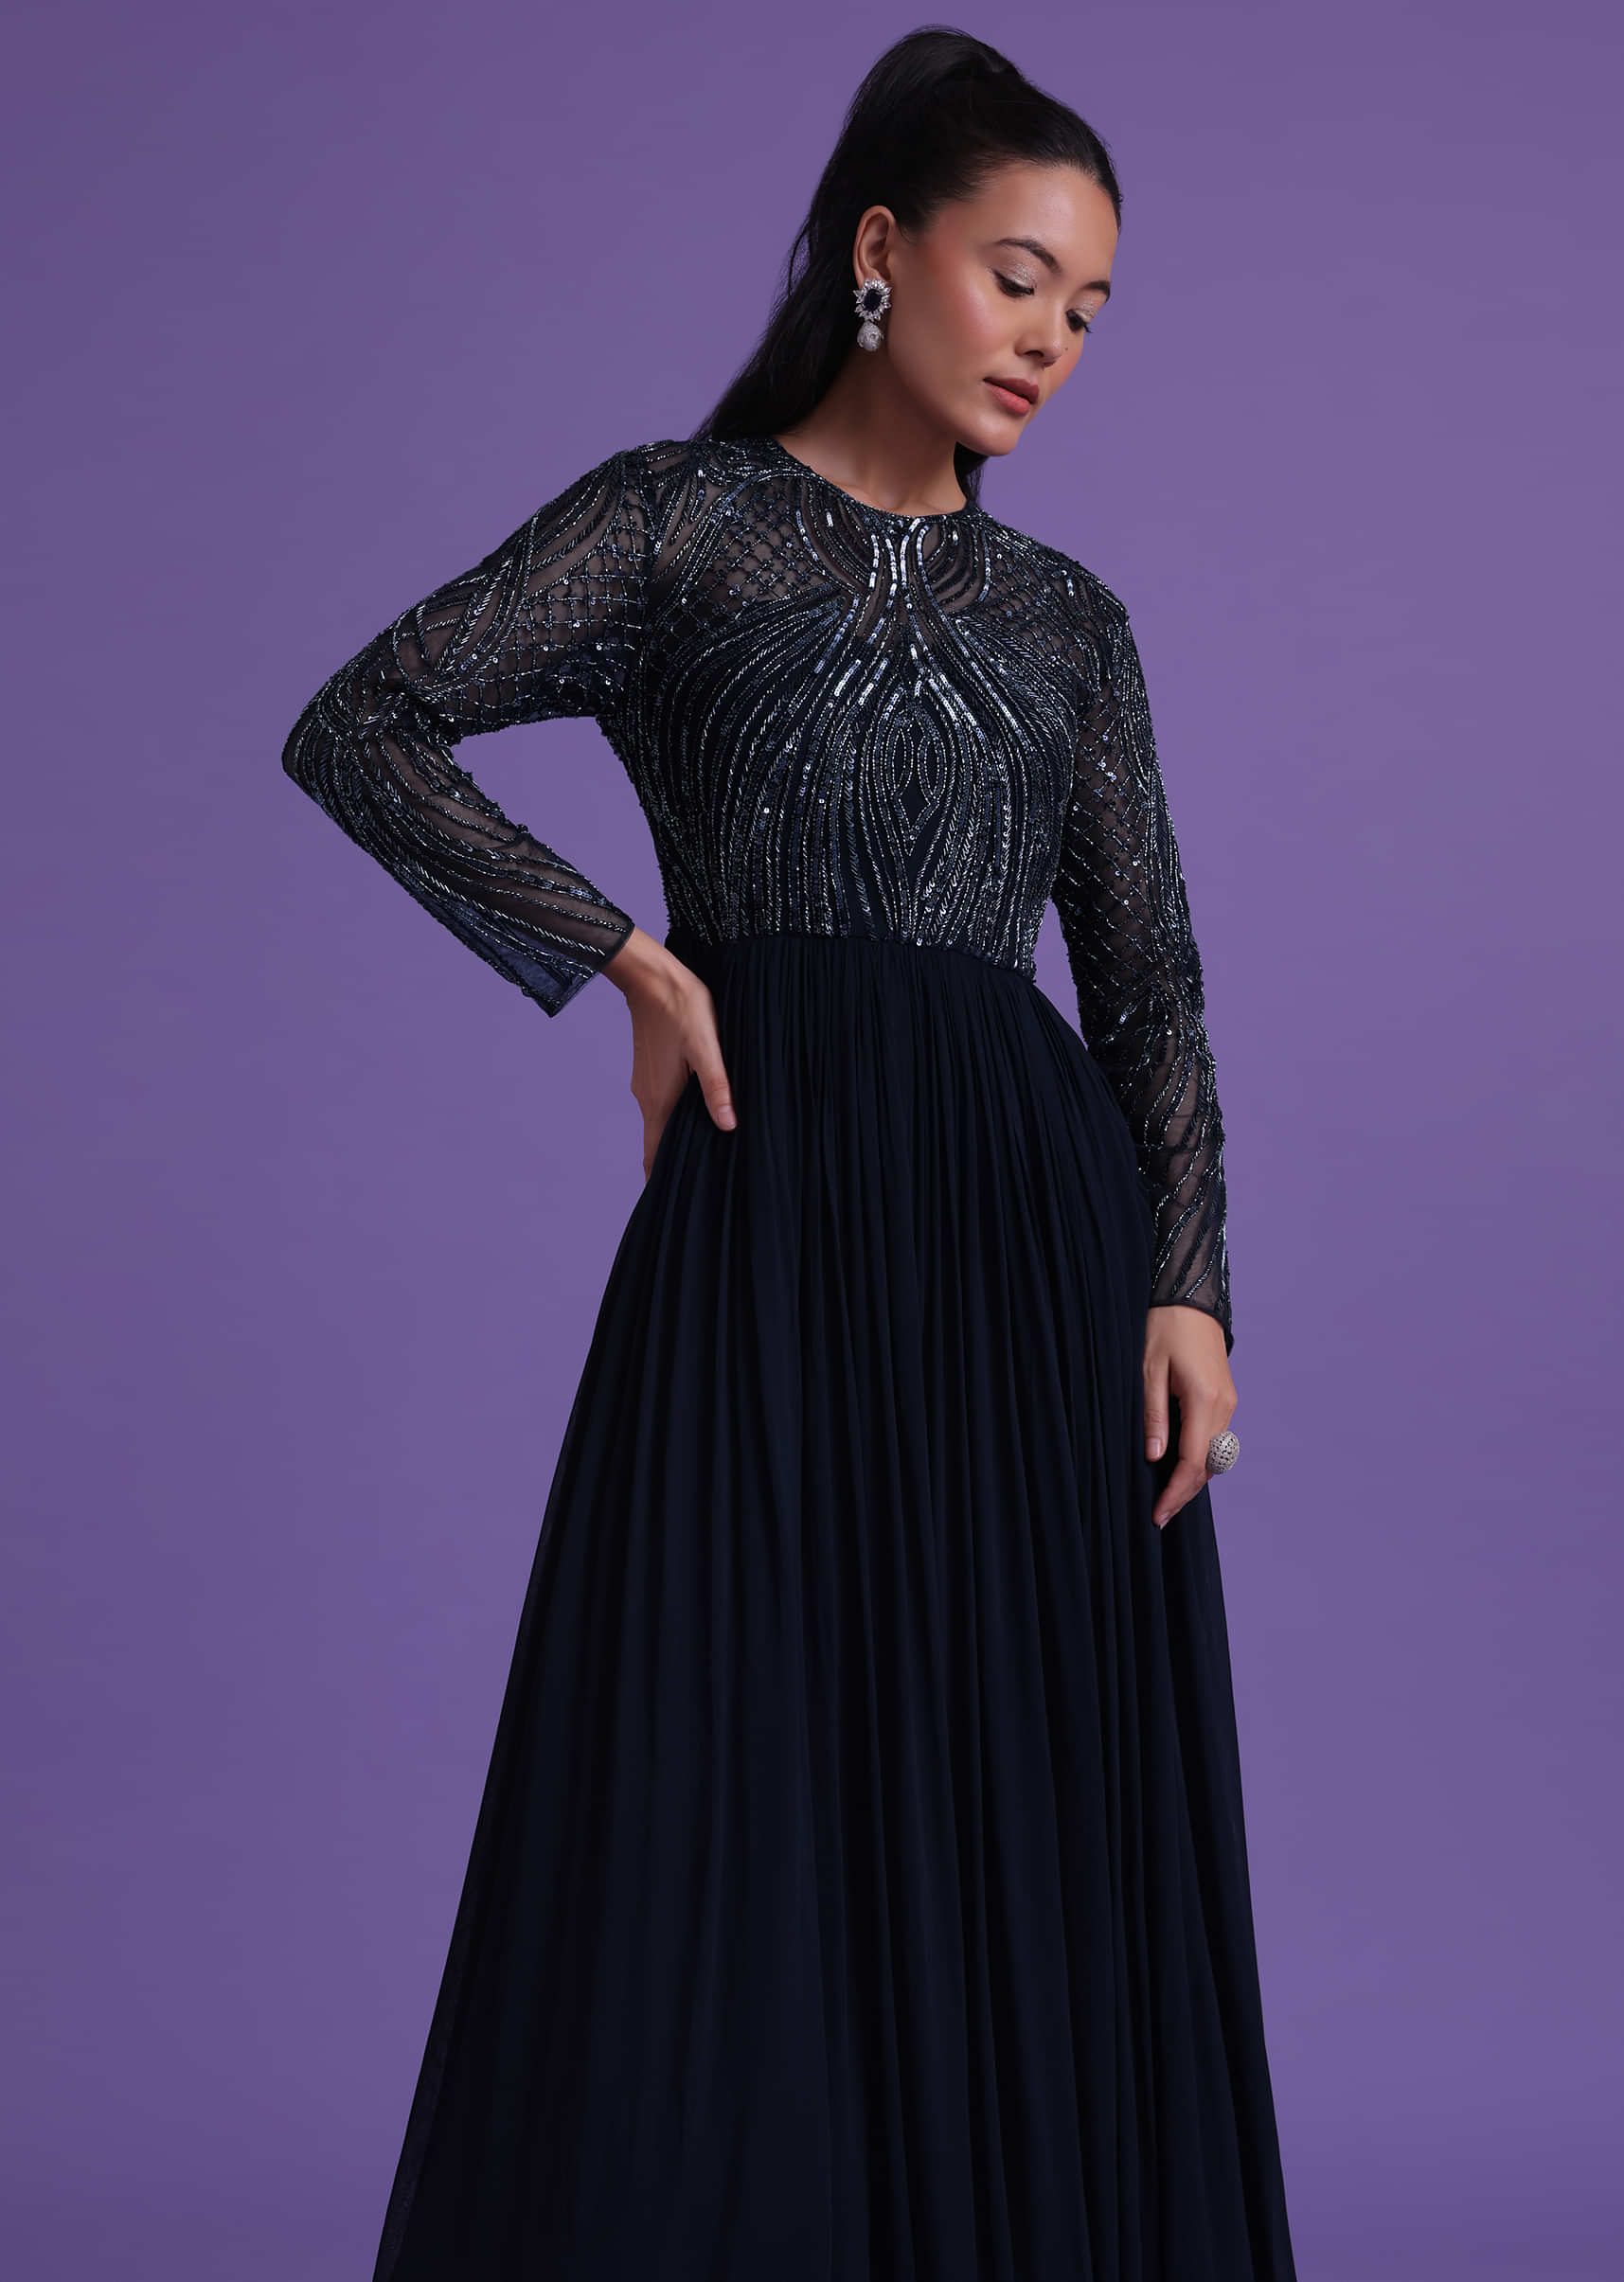 Fancy Gown Party Wear  Buy Fancy Gown Party Wear Online Starting at Just  234  Meesho